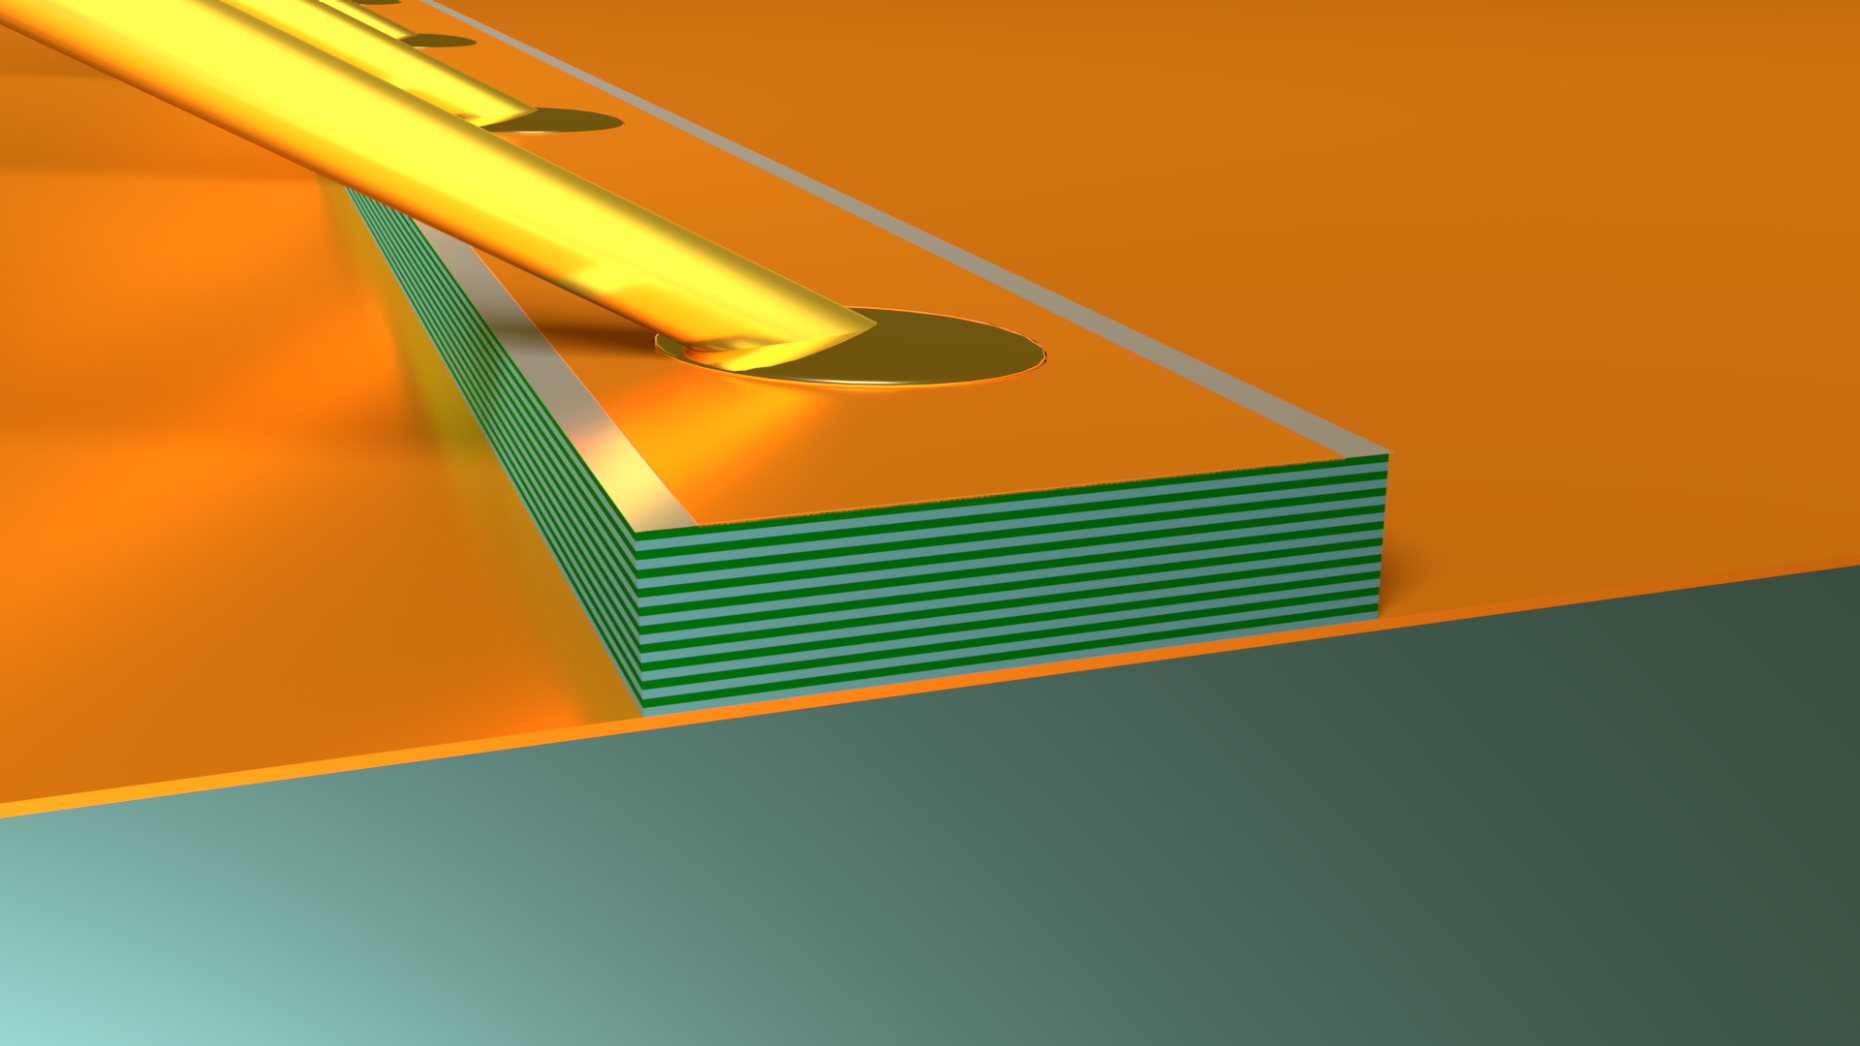 Enlarged view: 3D illustration of a double metal waveguide THz quantum cascade laser. The active region is sandwiched between two metallic plates, with wires bonded on the top metal.